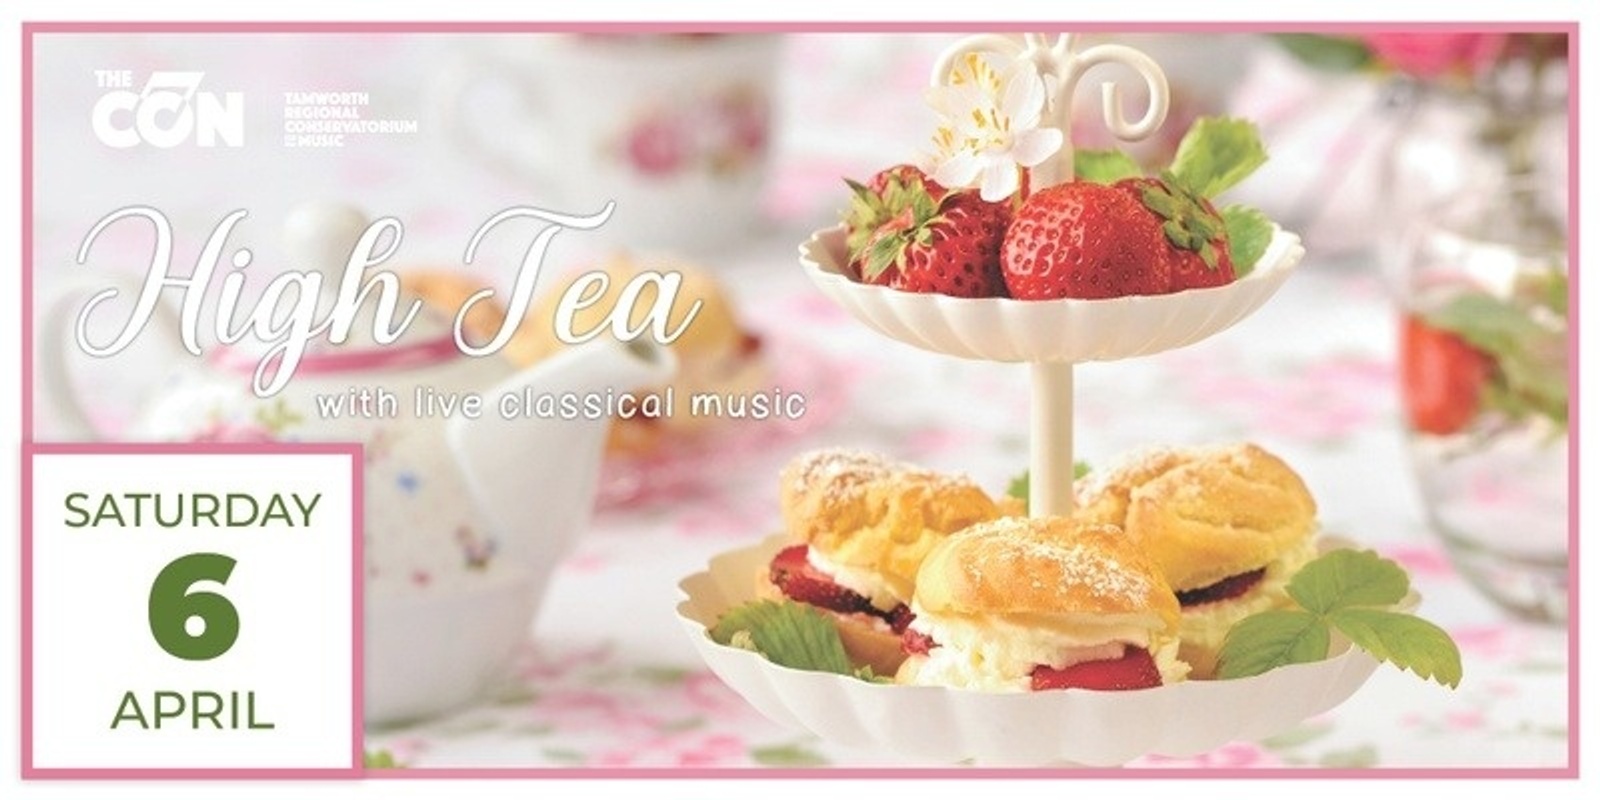 Banner image for High Tea - with live classical music